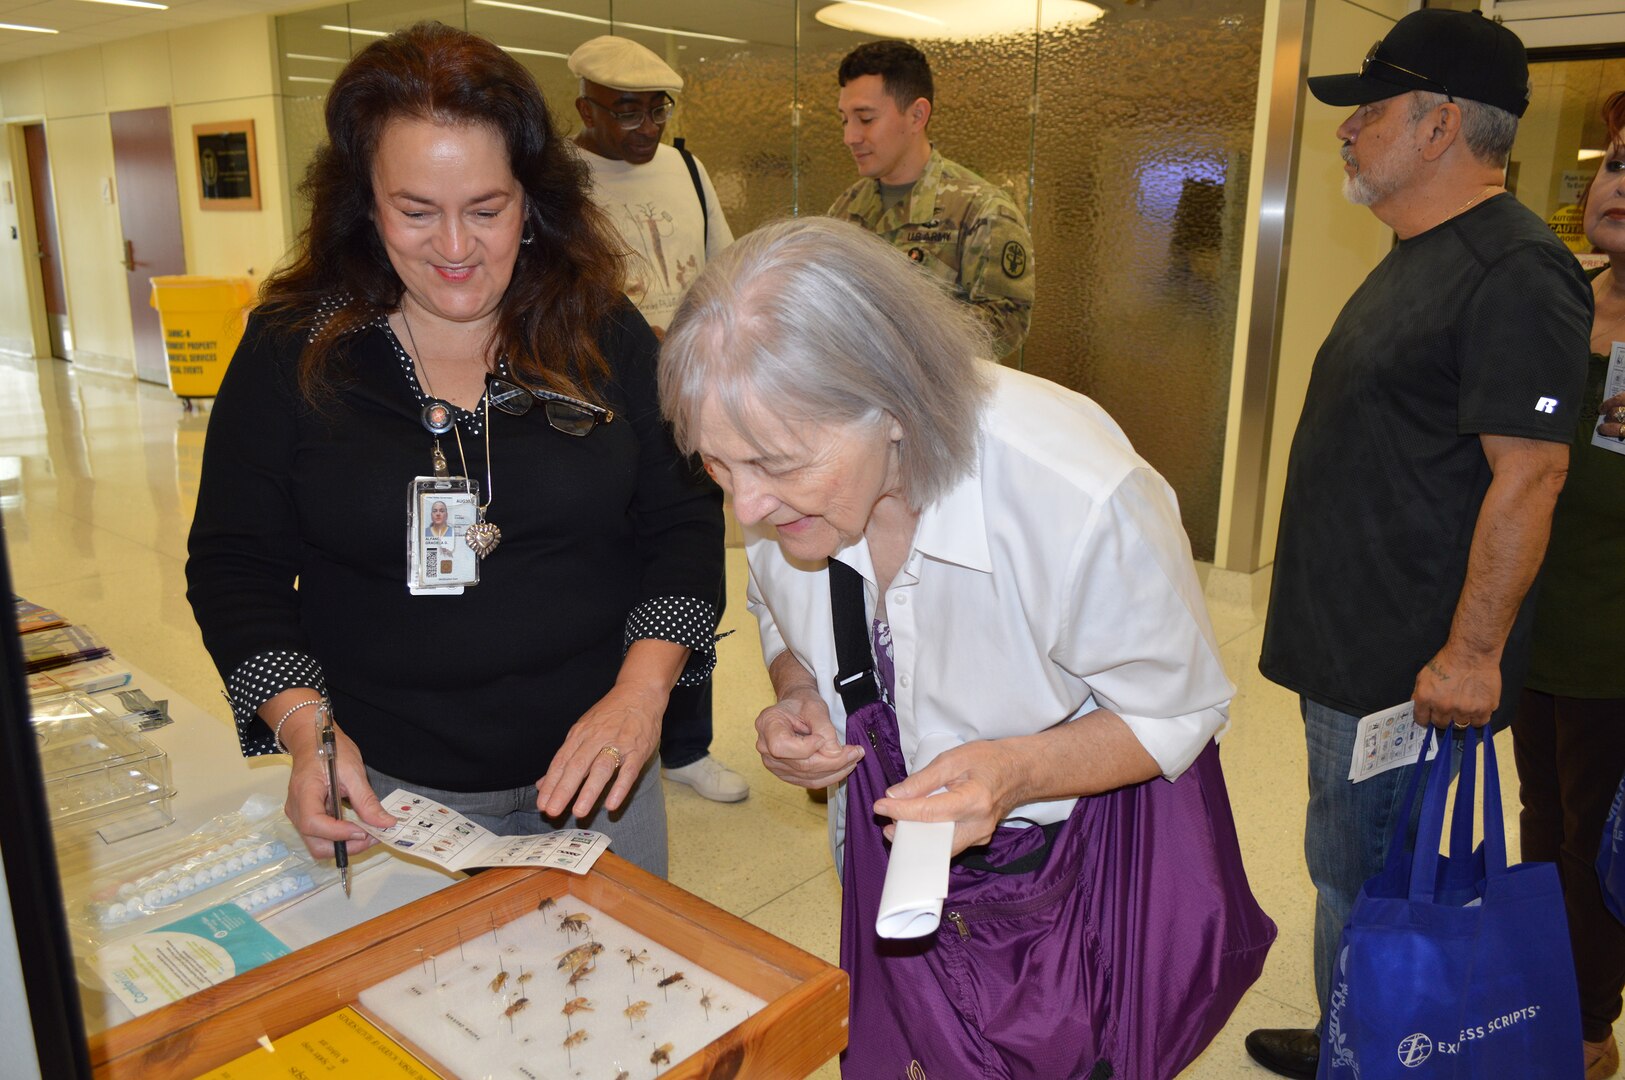 Graciela Alfano (left), licensed vocational nurse, shows Joann Dick, a regular attendee, different insects that can cause various allergy reactions during the Military Retiree Appreciation Day at Brooke Army Medical Center Medical Mall Oct. 14, 2017. Military retirees and service members who are about to retire can find out about useful programs and benefits at Military Retiree Appreciation Day Oct. 20, 2018 from 8 a.m. to noon at the Brooke Army Medical Center Medical Mall.